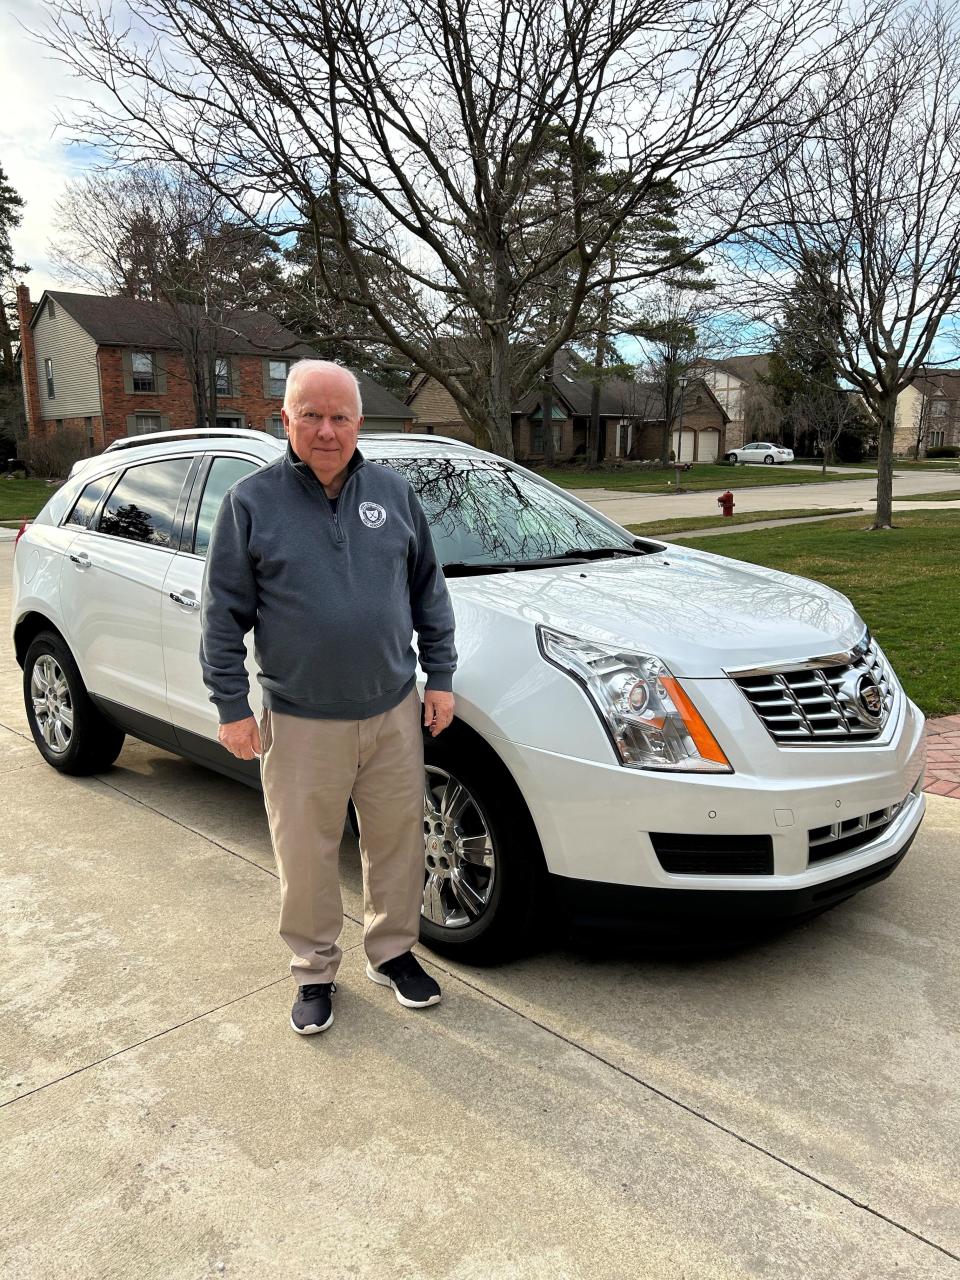 Will Lindley of Livonia was considering trading in his wife's 2016 Cadillac SRX (pictured here) for an electric vehicle, but he said it won't be a General Motors EV if it does not have Apple CarPlay.